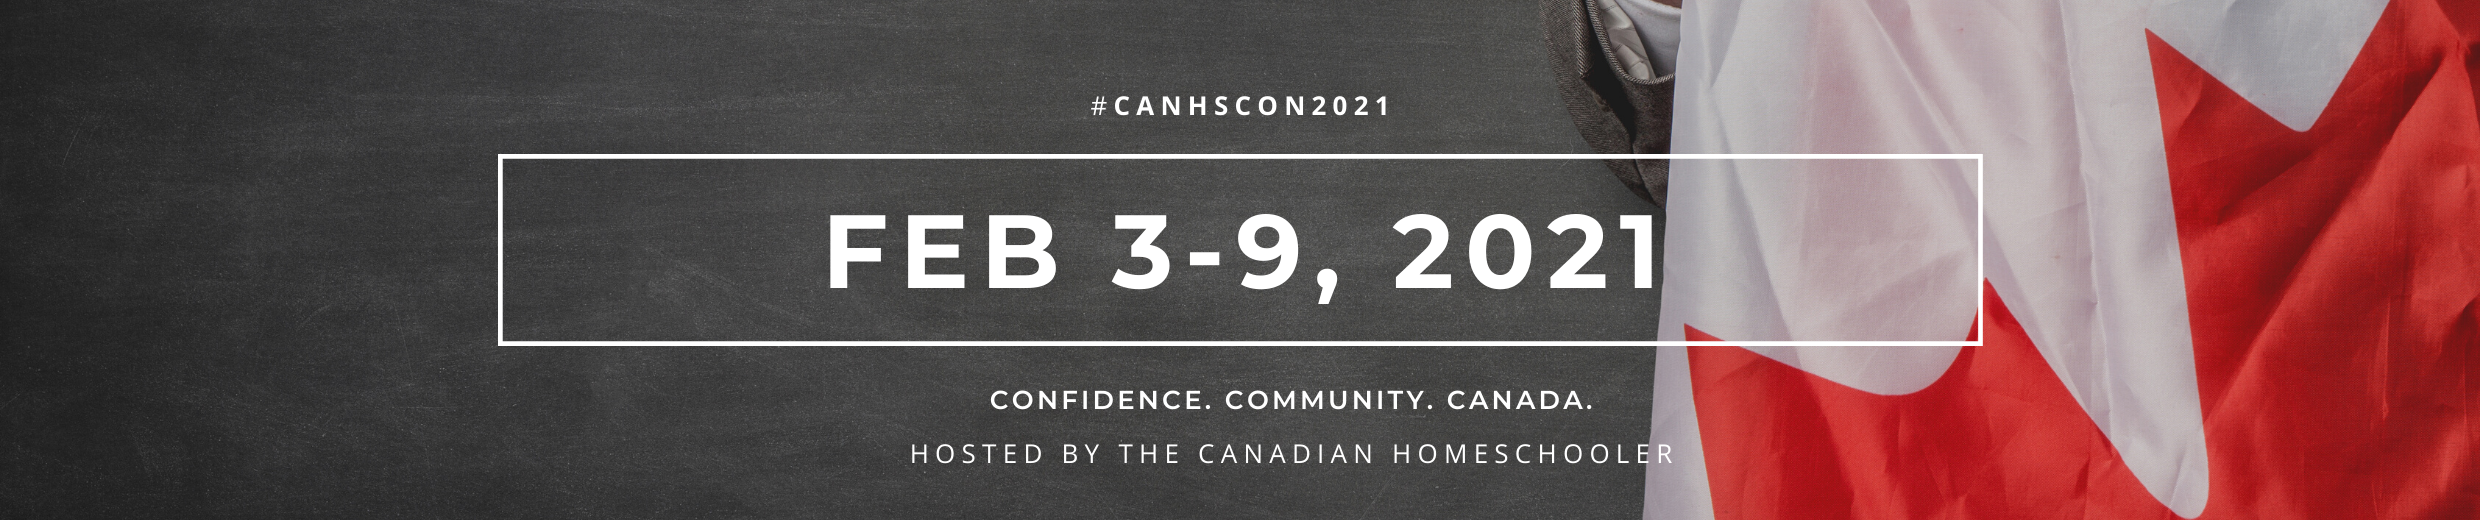 CANHSCON2021_Banner